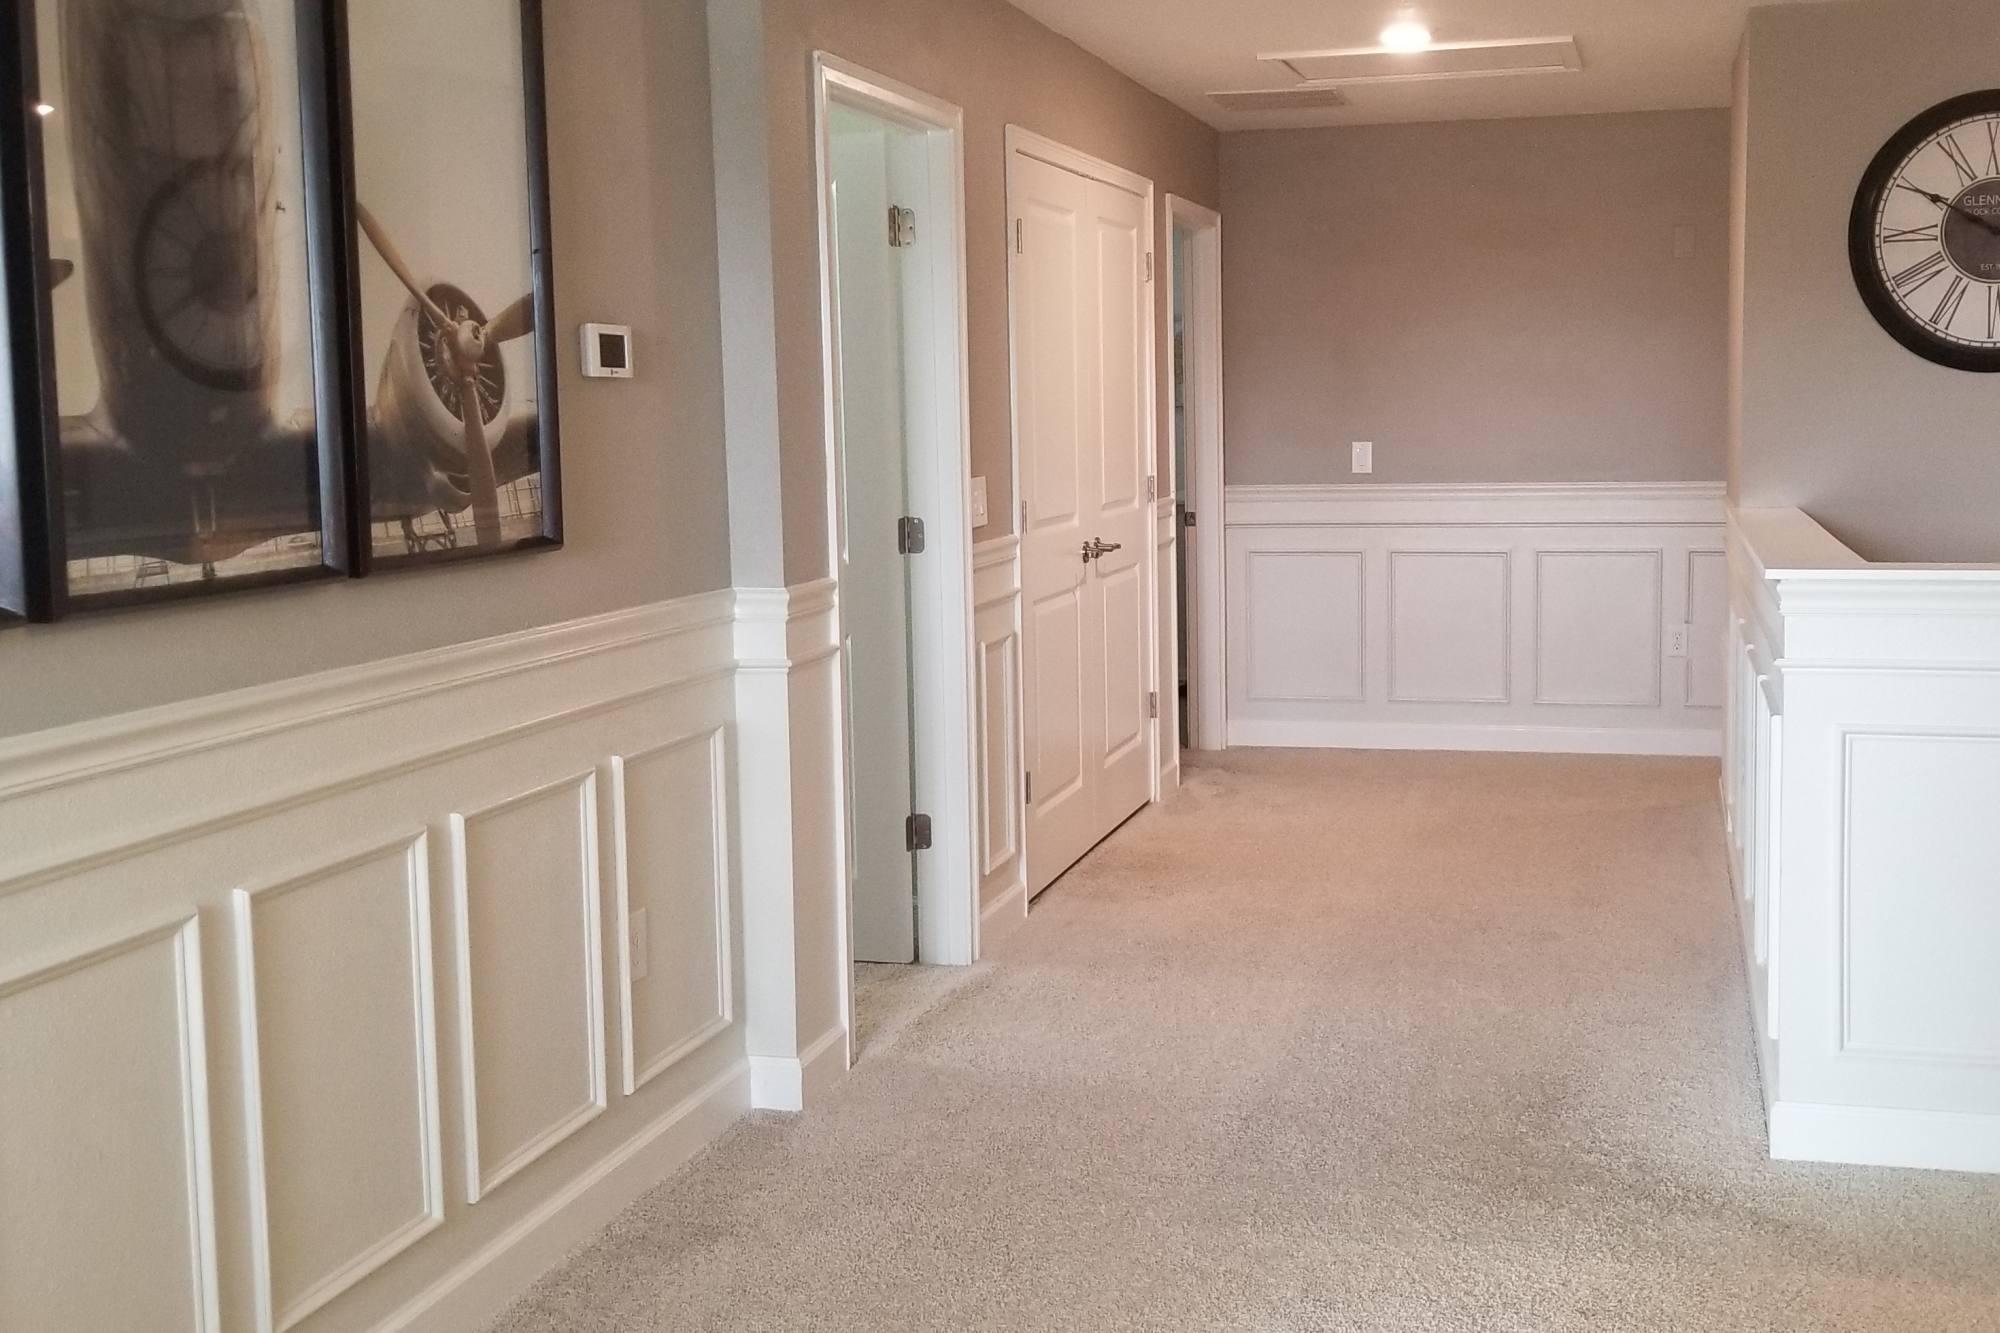 Easy Wainscoting - The Finished Product